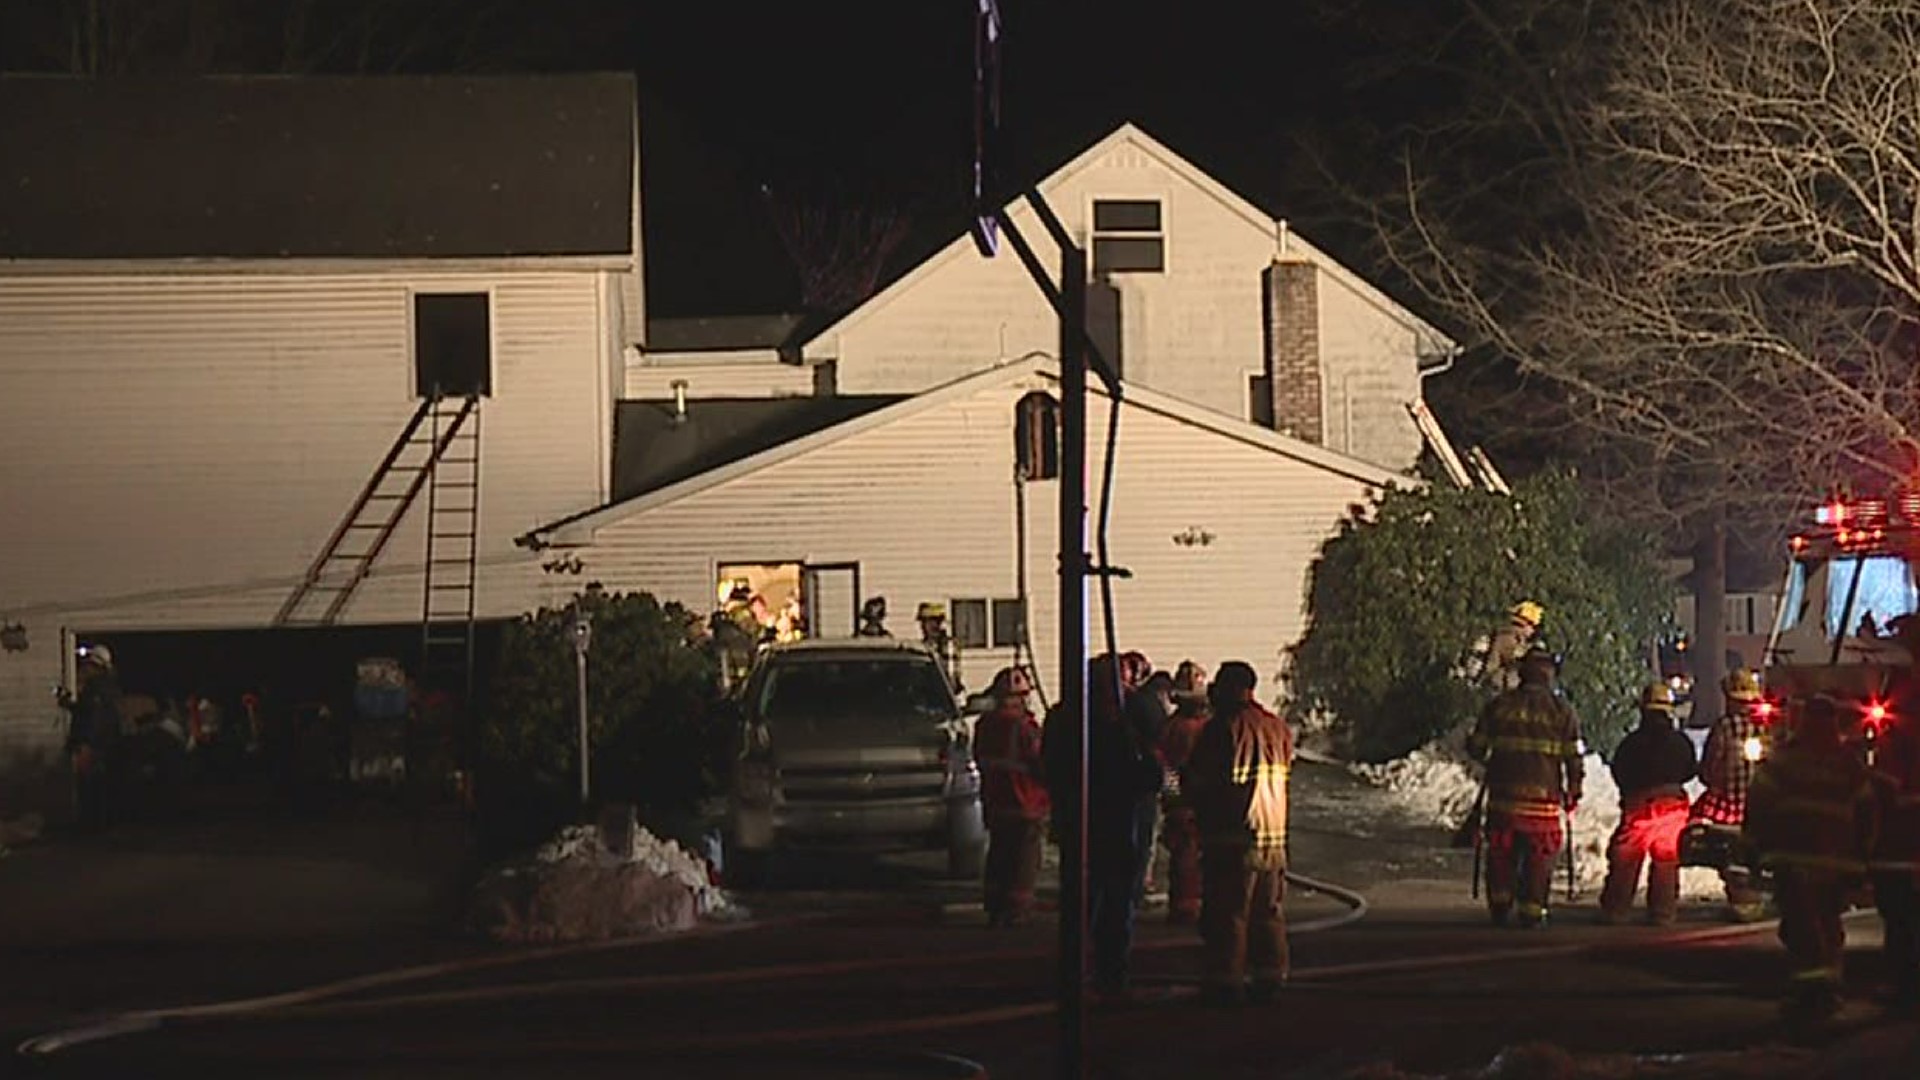 Fire and smoke damaged a home Tuesday afternoon in Luzerne County.